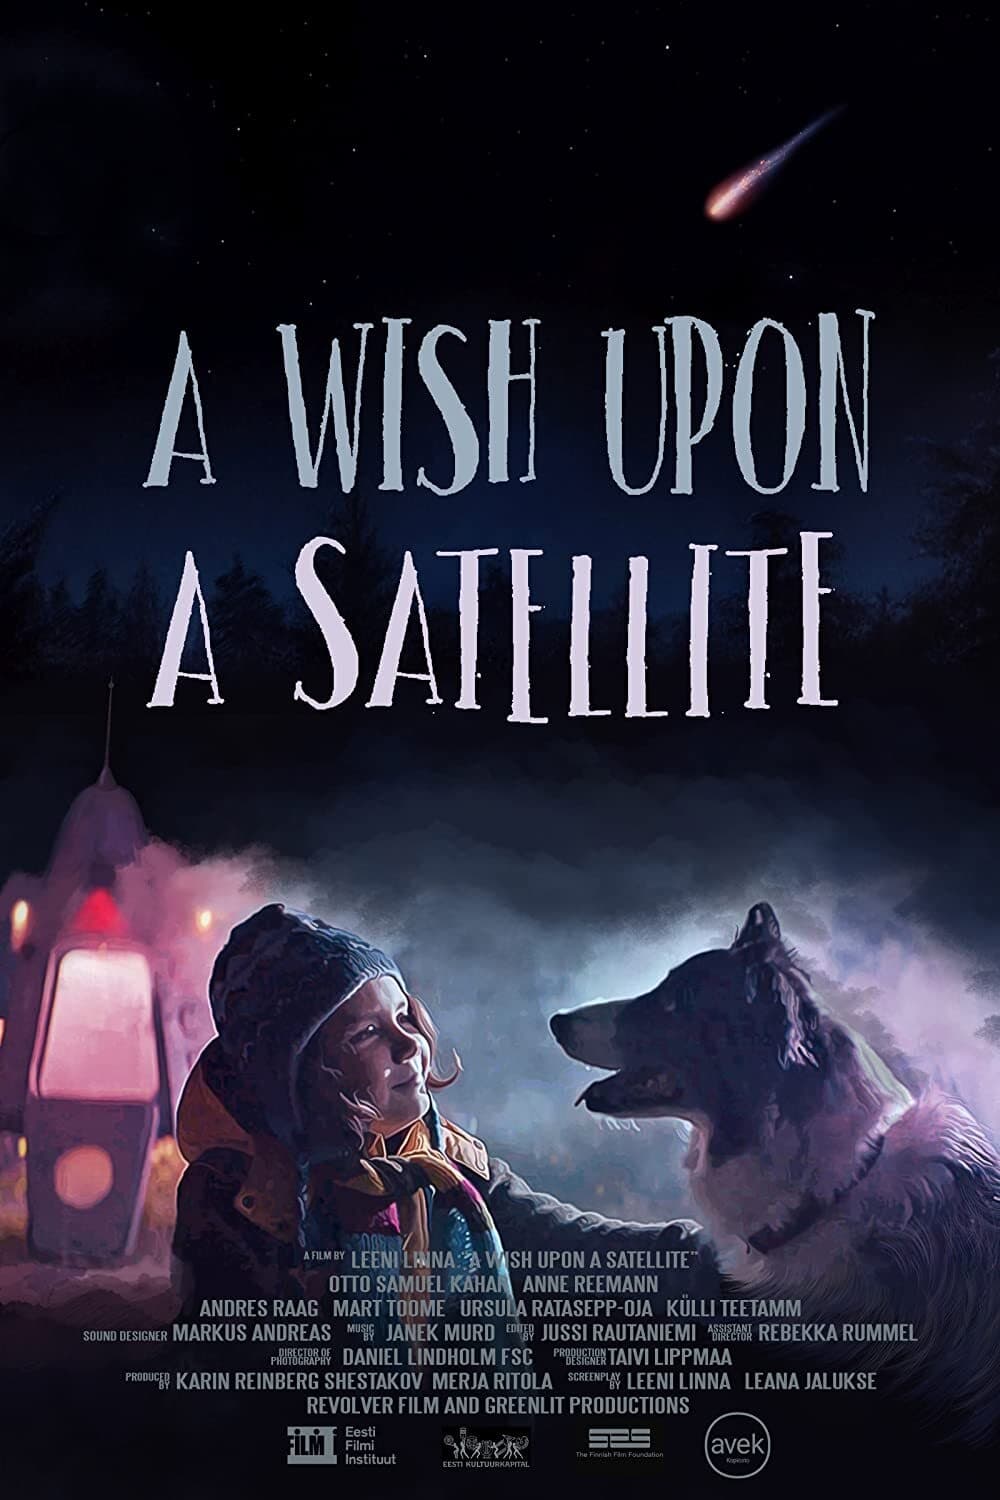 A Wish Upon A Satellite